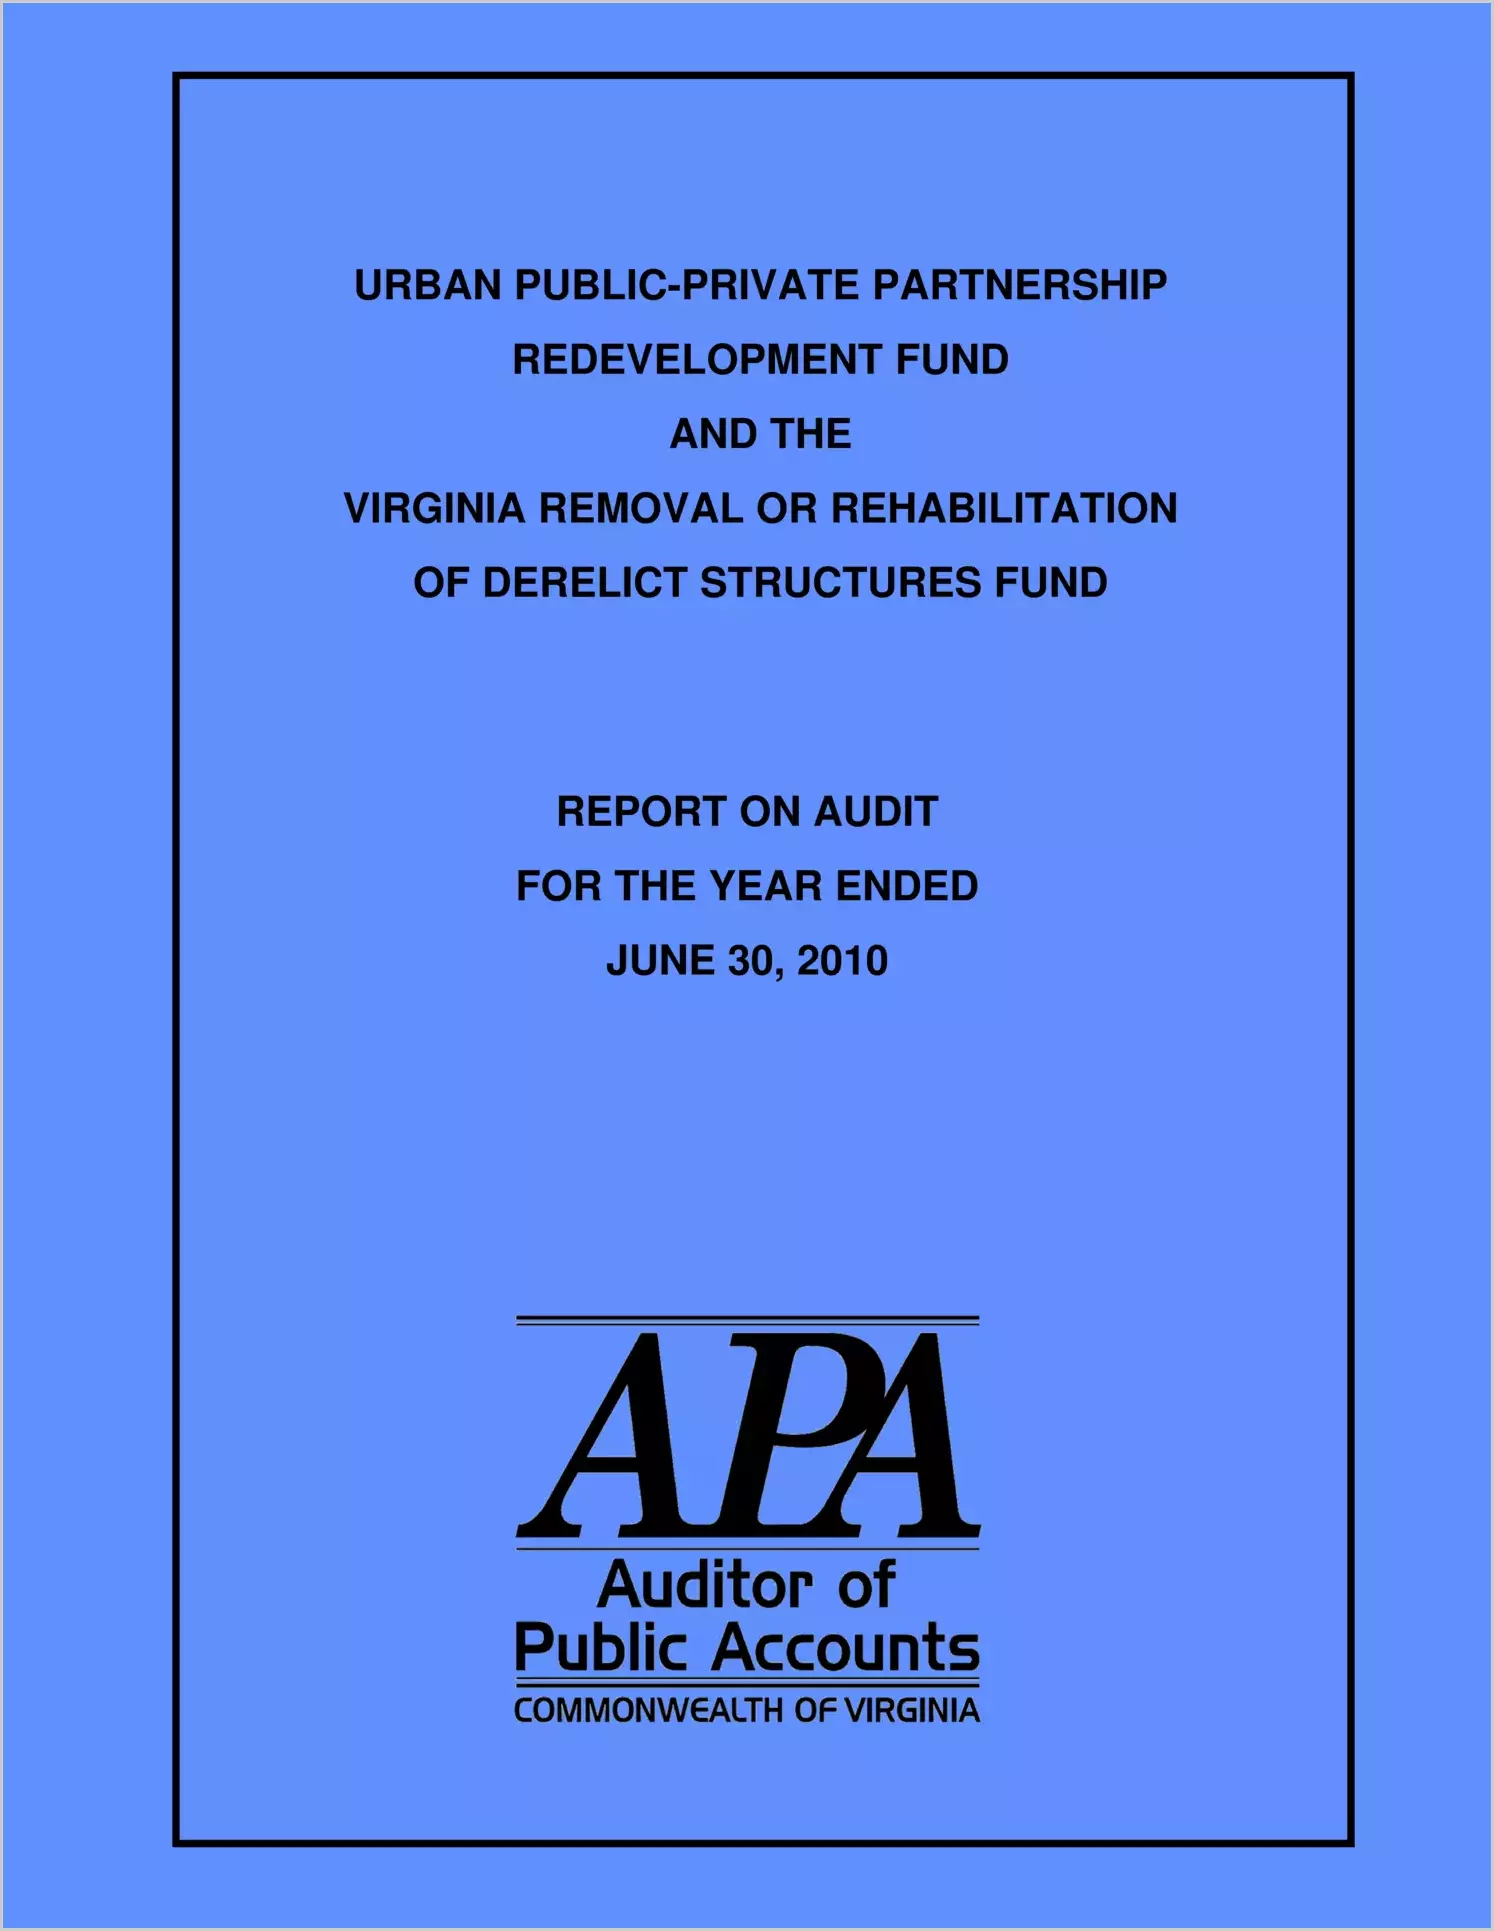 Urban Public-Private Partnership Redevelopment Fund and the Virginia Removal or Rehabilitation of Derelict Structures Fund for the year ended June 30, 2010